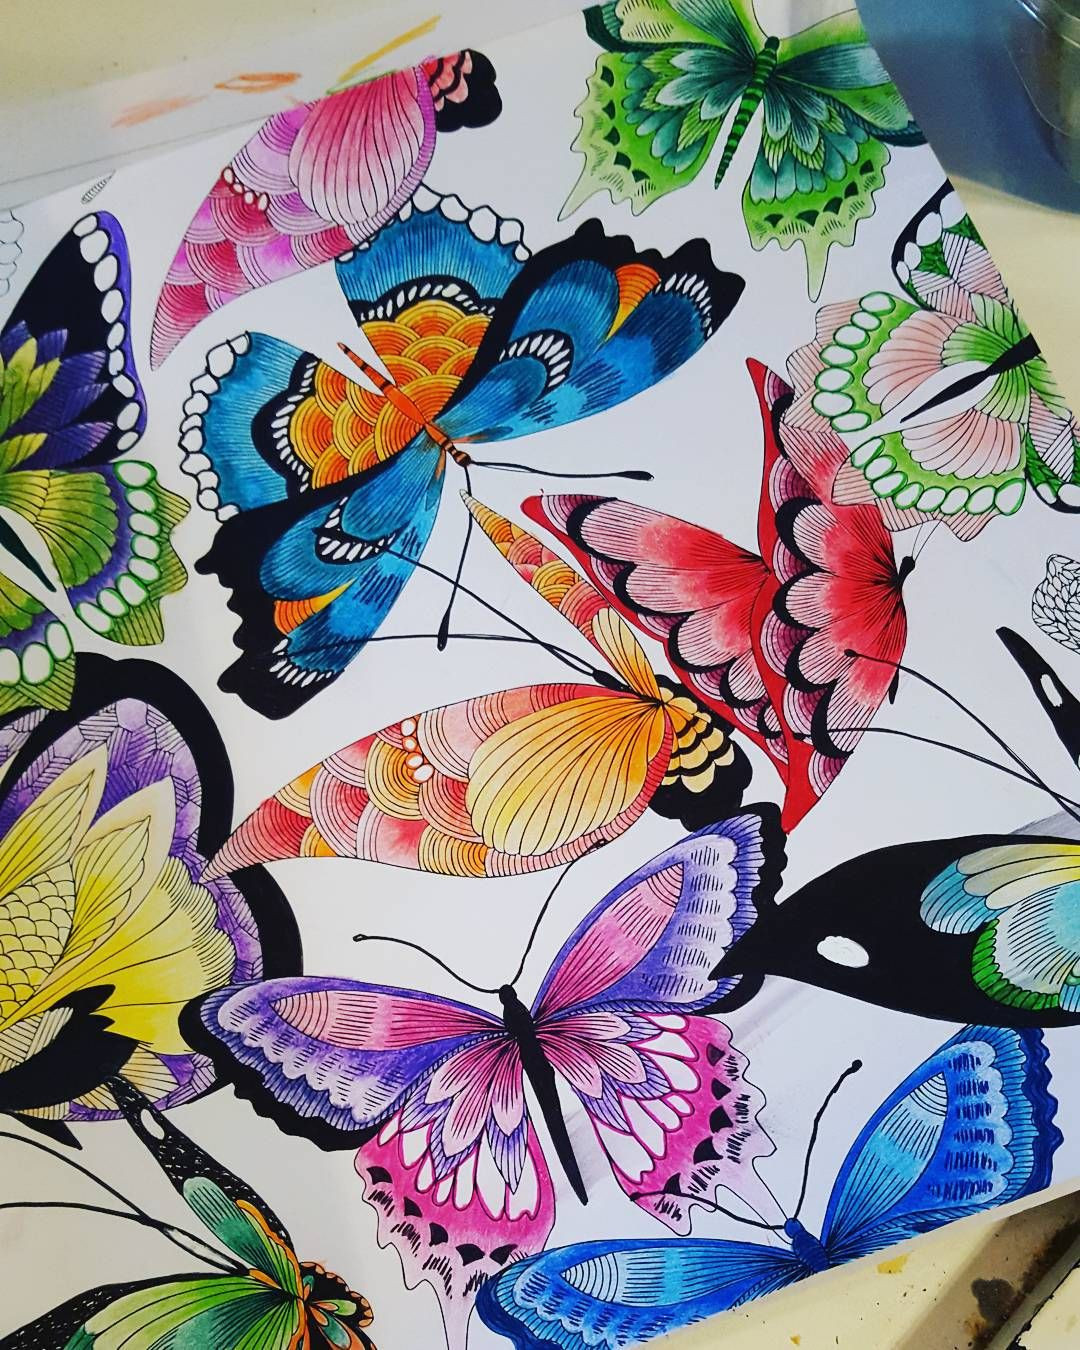 Finished Adult Coloring Pages
 Finished my butterflies tropicalworld adultcoloringbook